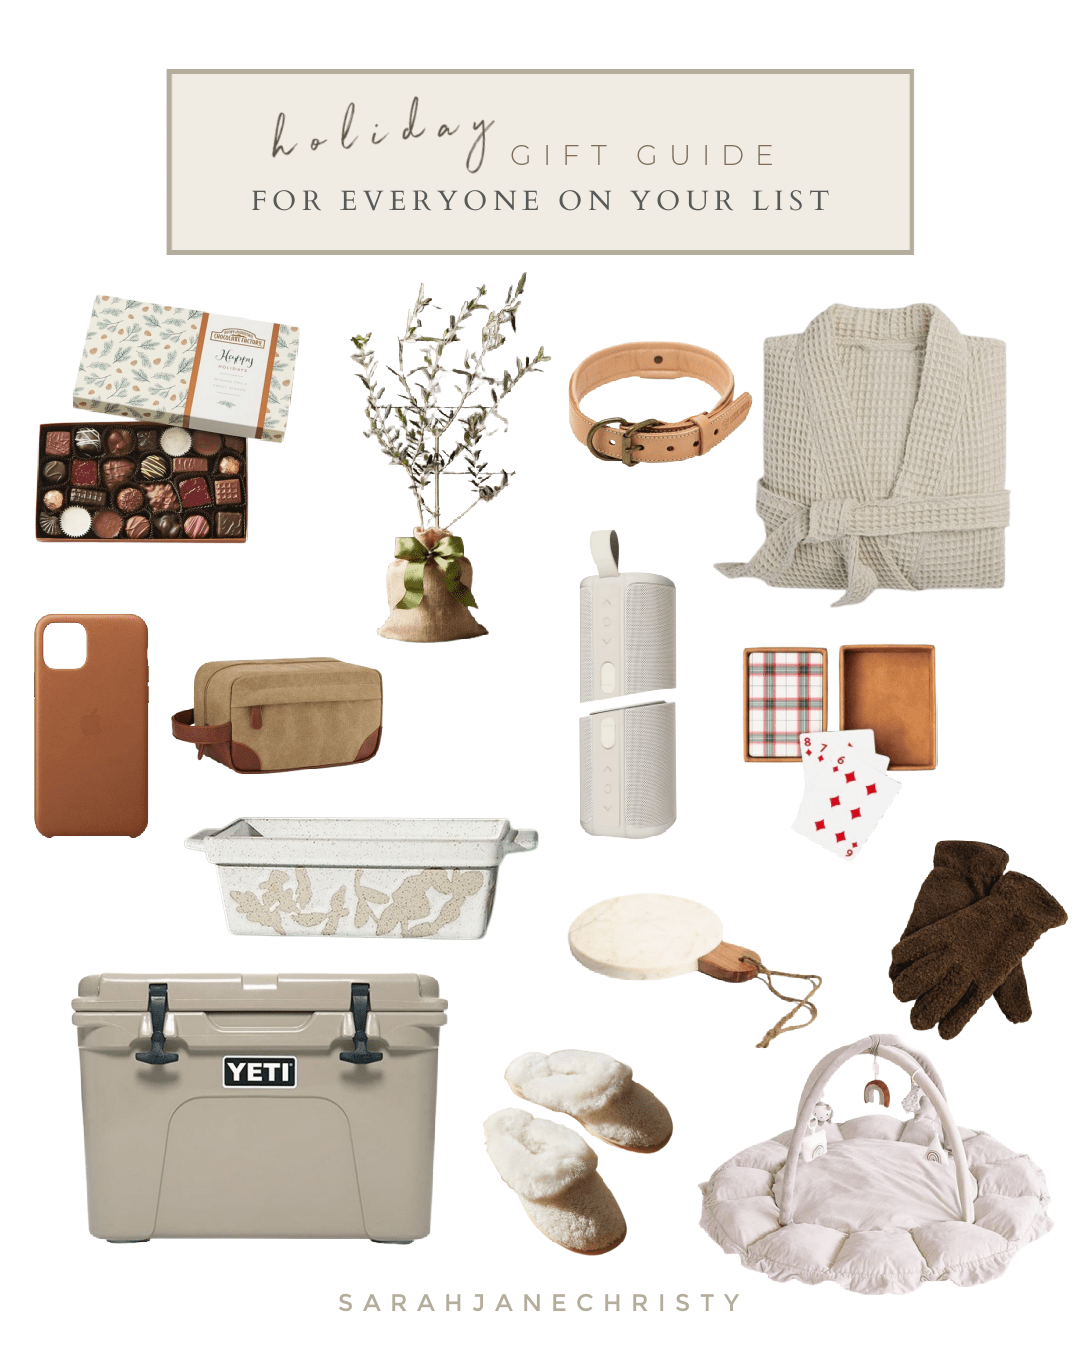 Holiday Gift Guide for Everyone on Your List - Sarah Jane Christy